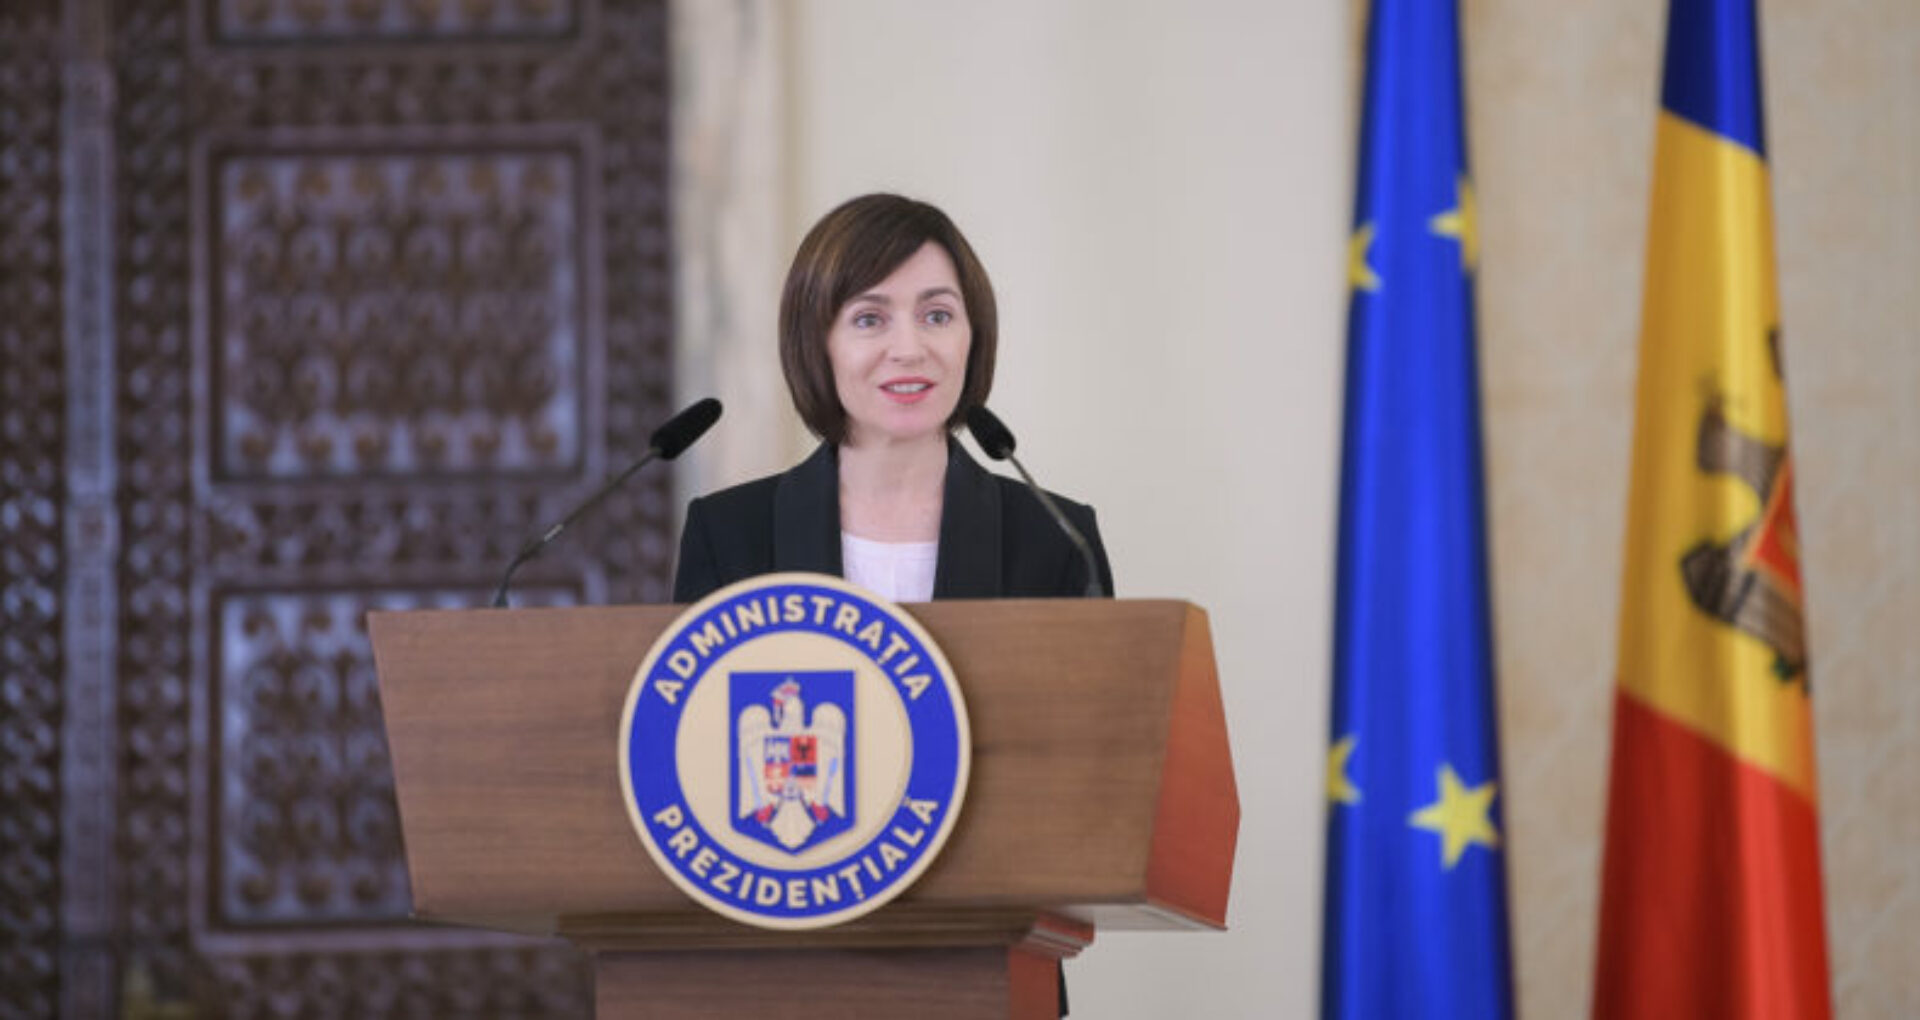 Prime Minister Maia Sandu to Make an Official Visit to Lithuania